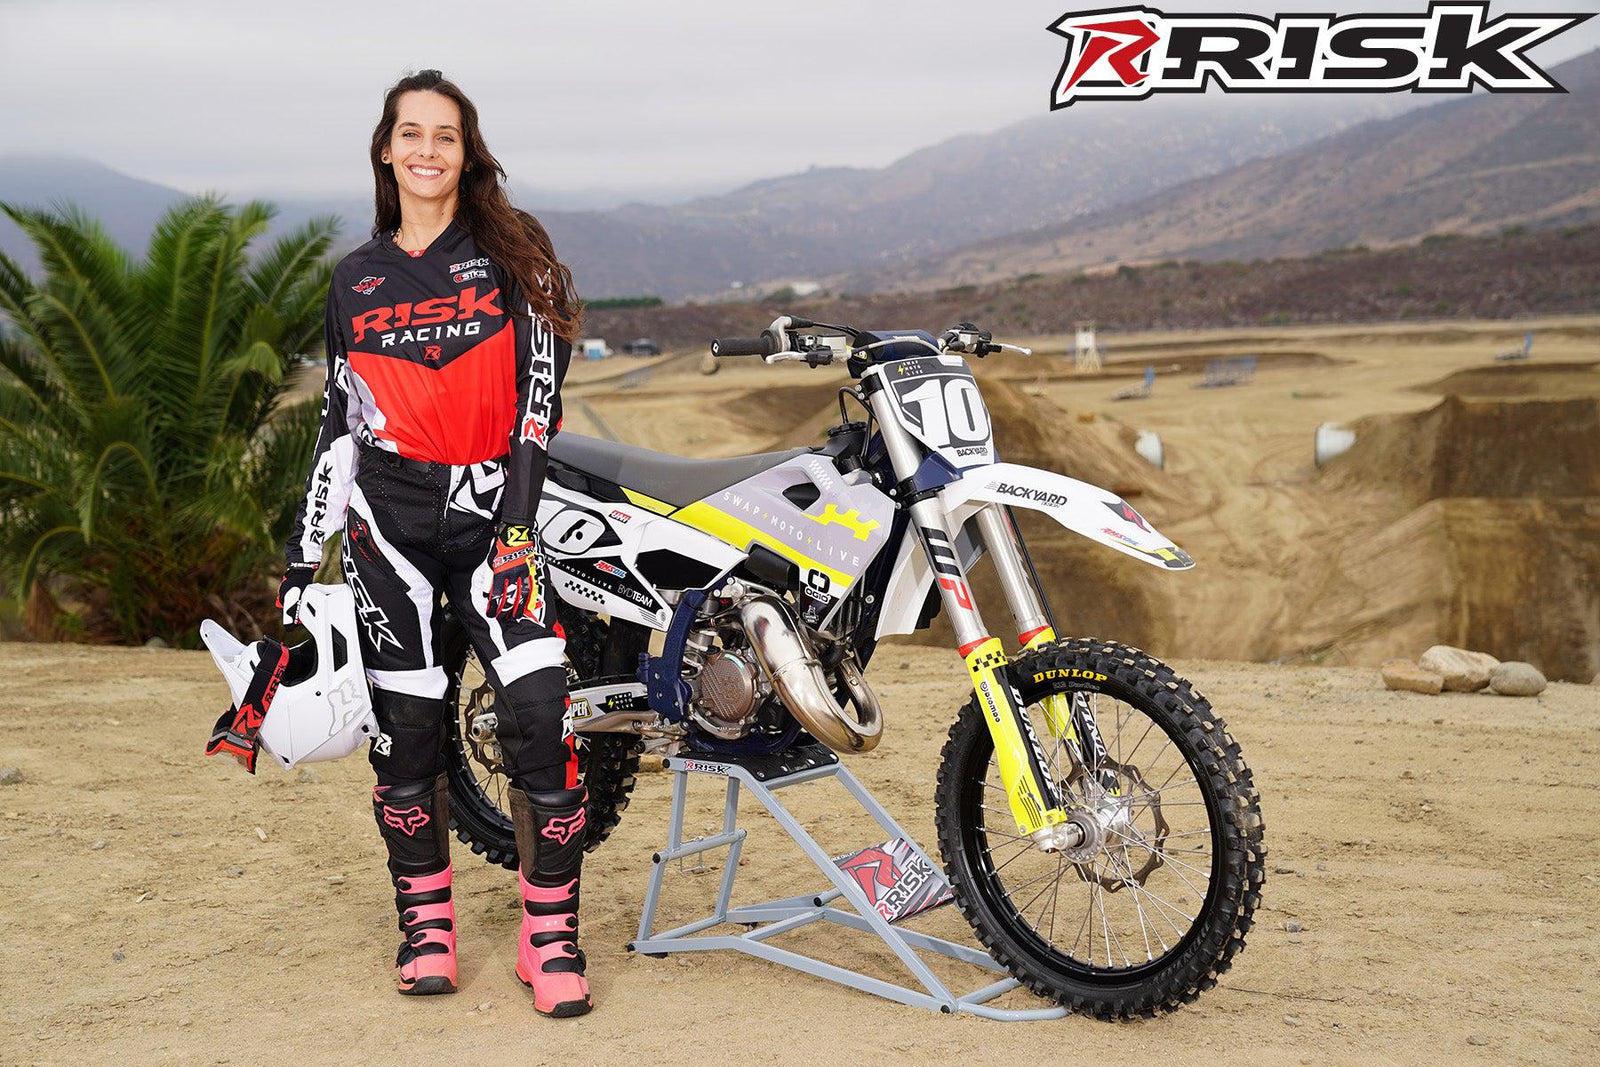 October's Risk Racing Moto Model Jessica Victorino posing in various bikinis and Risk Racing Jerseys next to a dirt bike that's sitting on a Risk Racing RR1-Ride-On stand - Pose #2